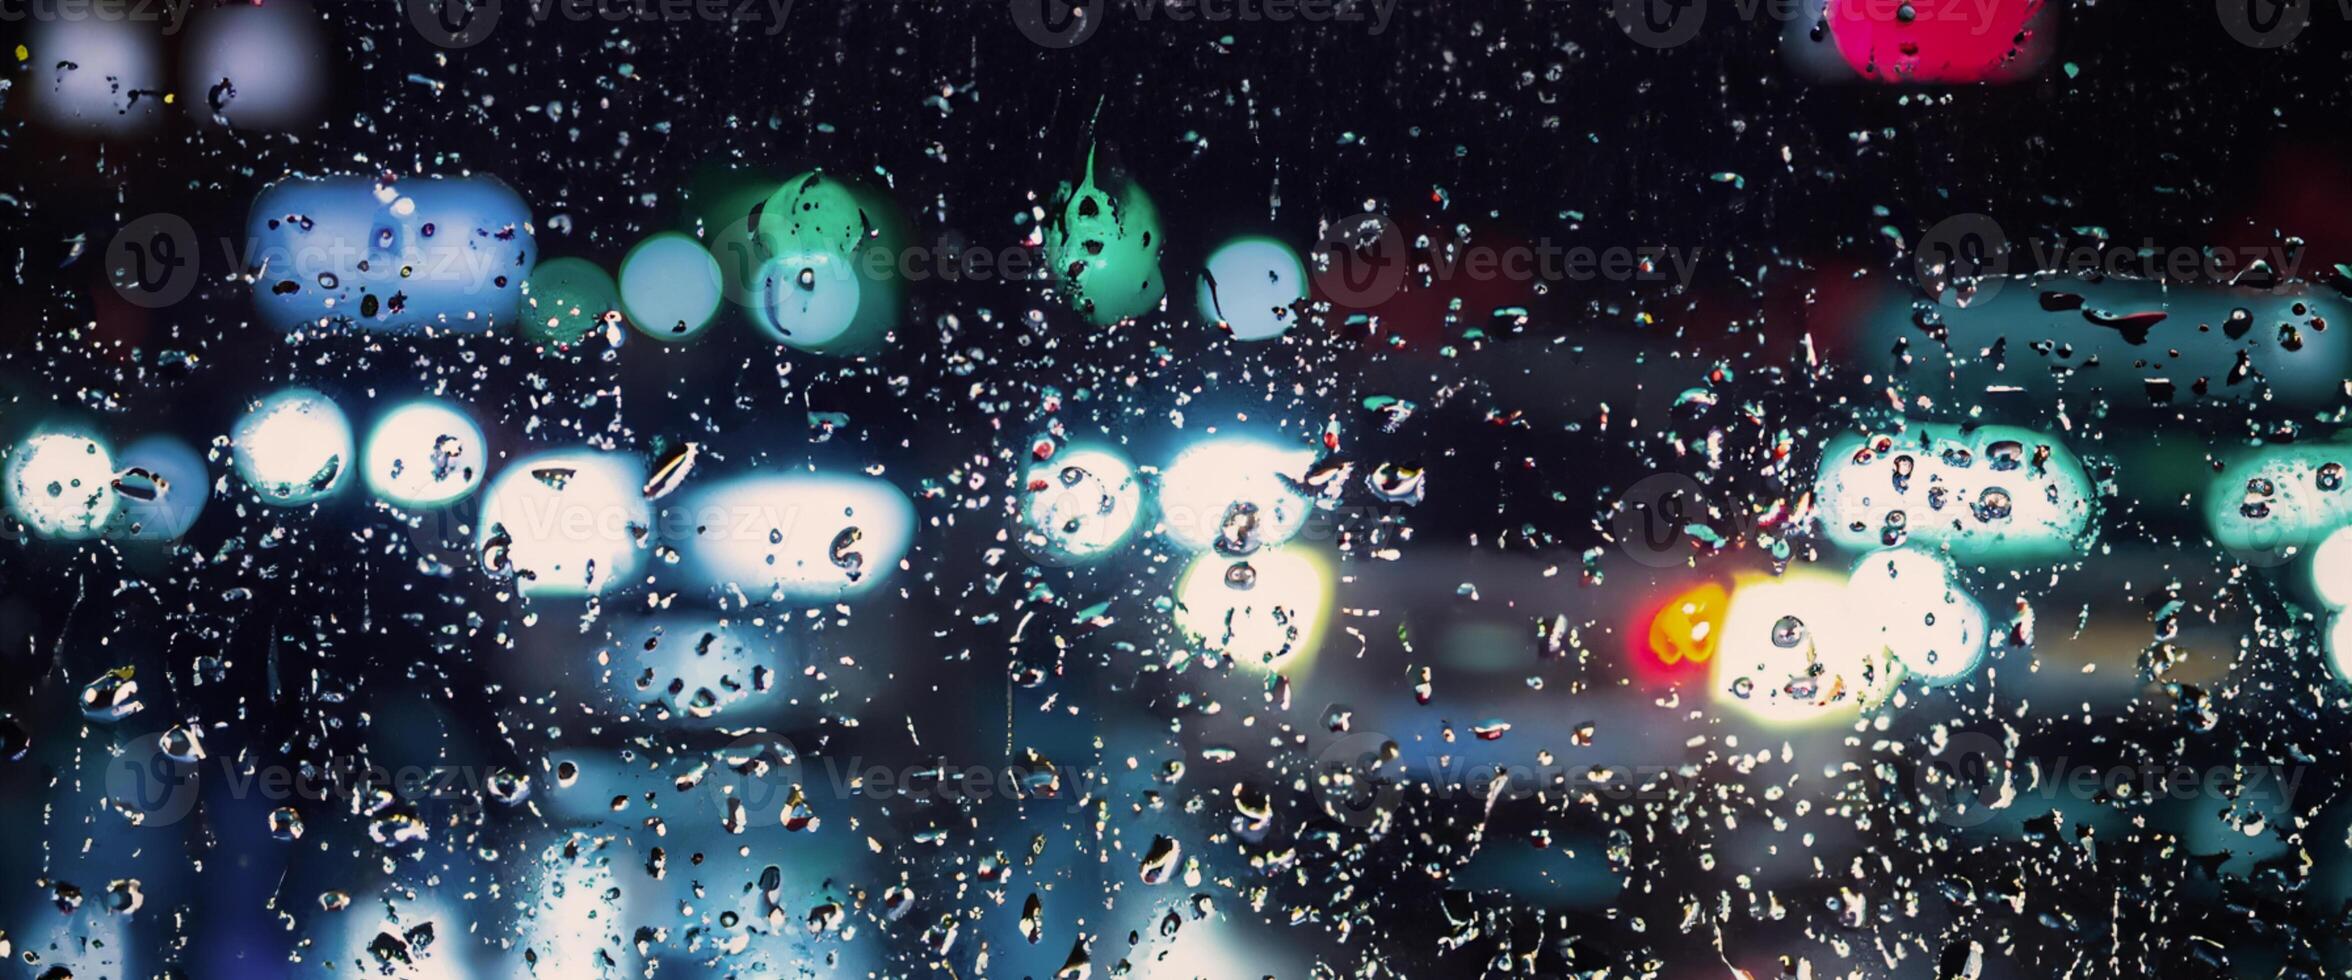 Driving in raining. Rain on car windshield or car window in rainy season and blurry traffic road in background. Rain drops on car mirror. Road in rain. Drizzle raining decreases driving visibility. photo